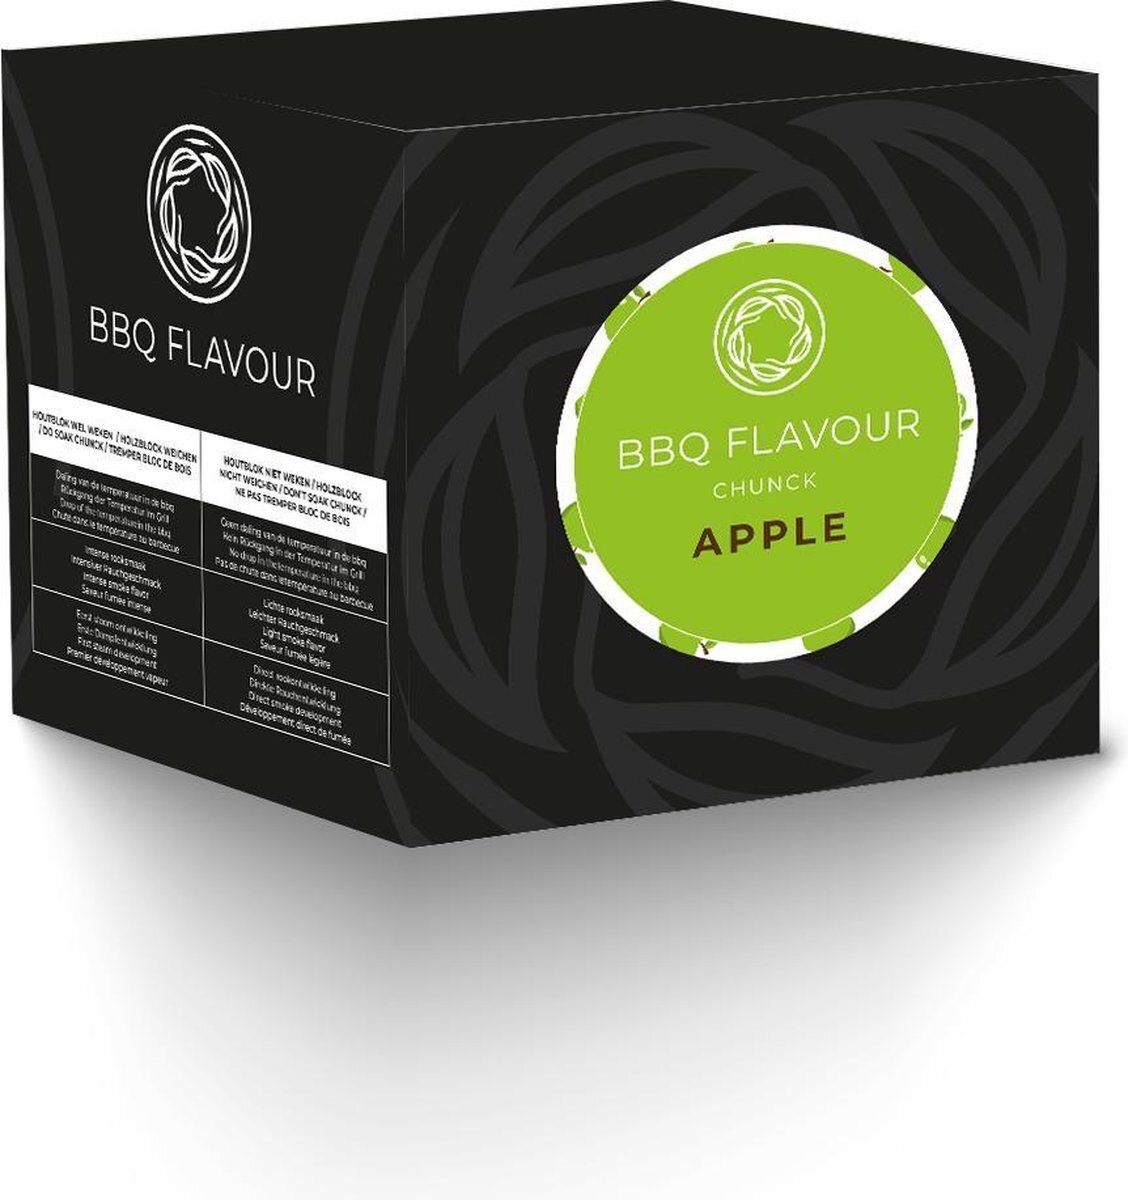 BBQ Flavour | Chunk Apple | Rookhout chunk | Smokewood | Smokewood chunks | Houtchunks | BBQ rookhout | Kamado | Hout | chunks | rookhout chunks | Houtblokken